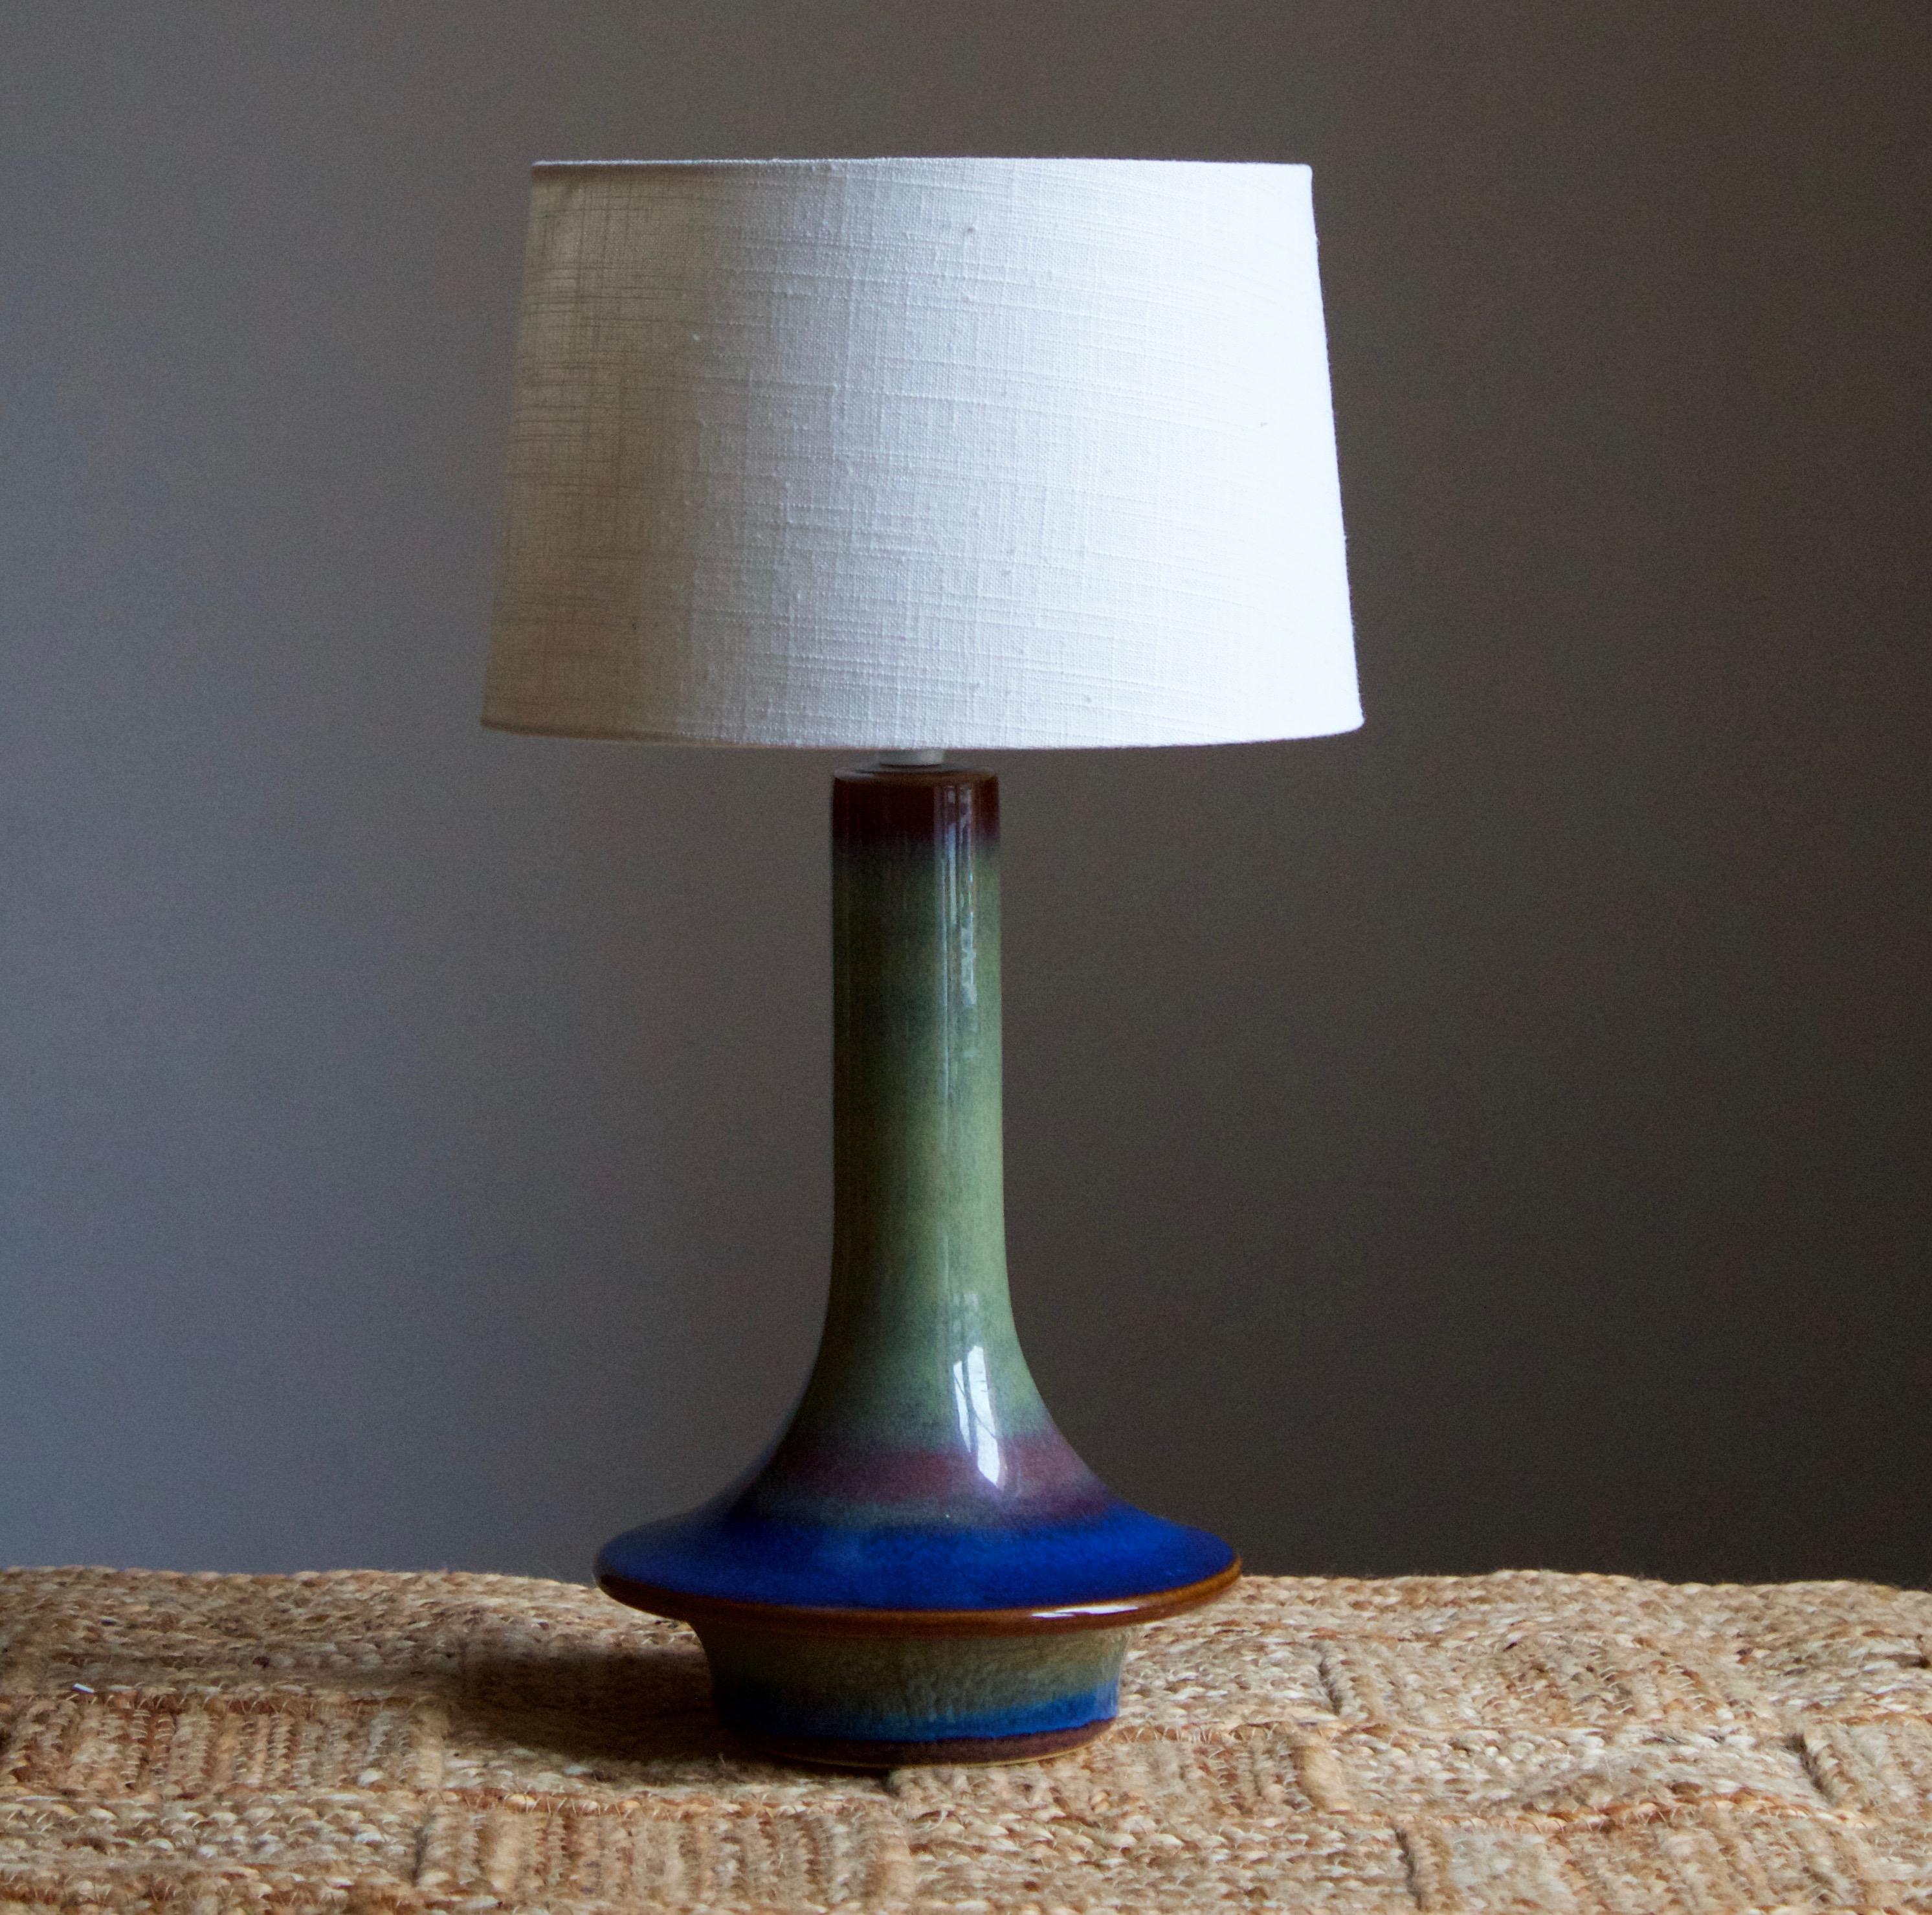 A table lamp produced by Søholm Keramik, located on the island of Bornholm in Denmark. Features a highly artistic blue and green glaze.

Sold without lampshade. Stated dimensions exclude the lampshade.

Other designers of the period include Axel